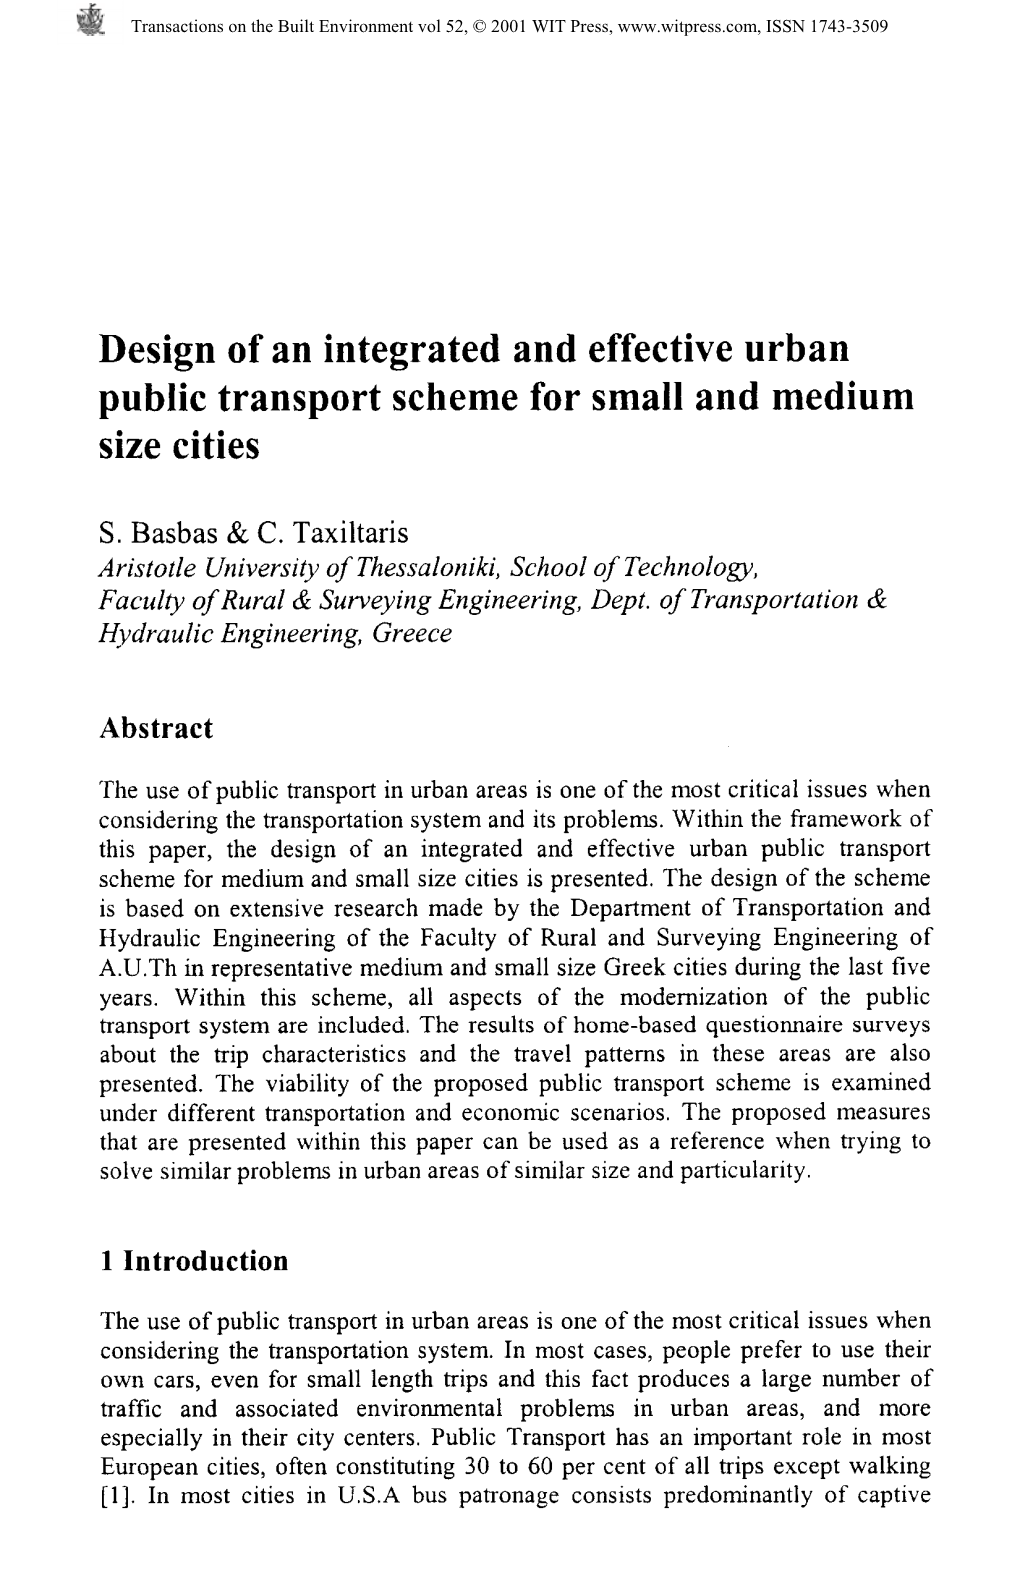 Design of an Integrated and Effective Urban Public Transport Scheme for Small and Medium Size Cities